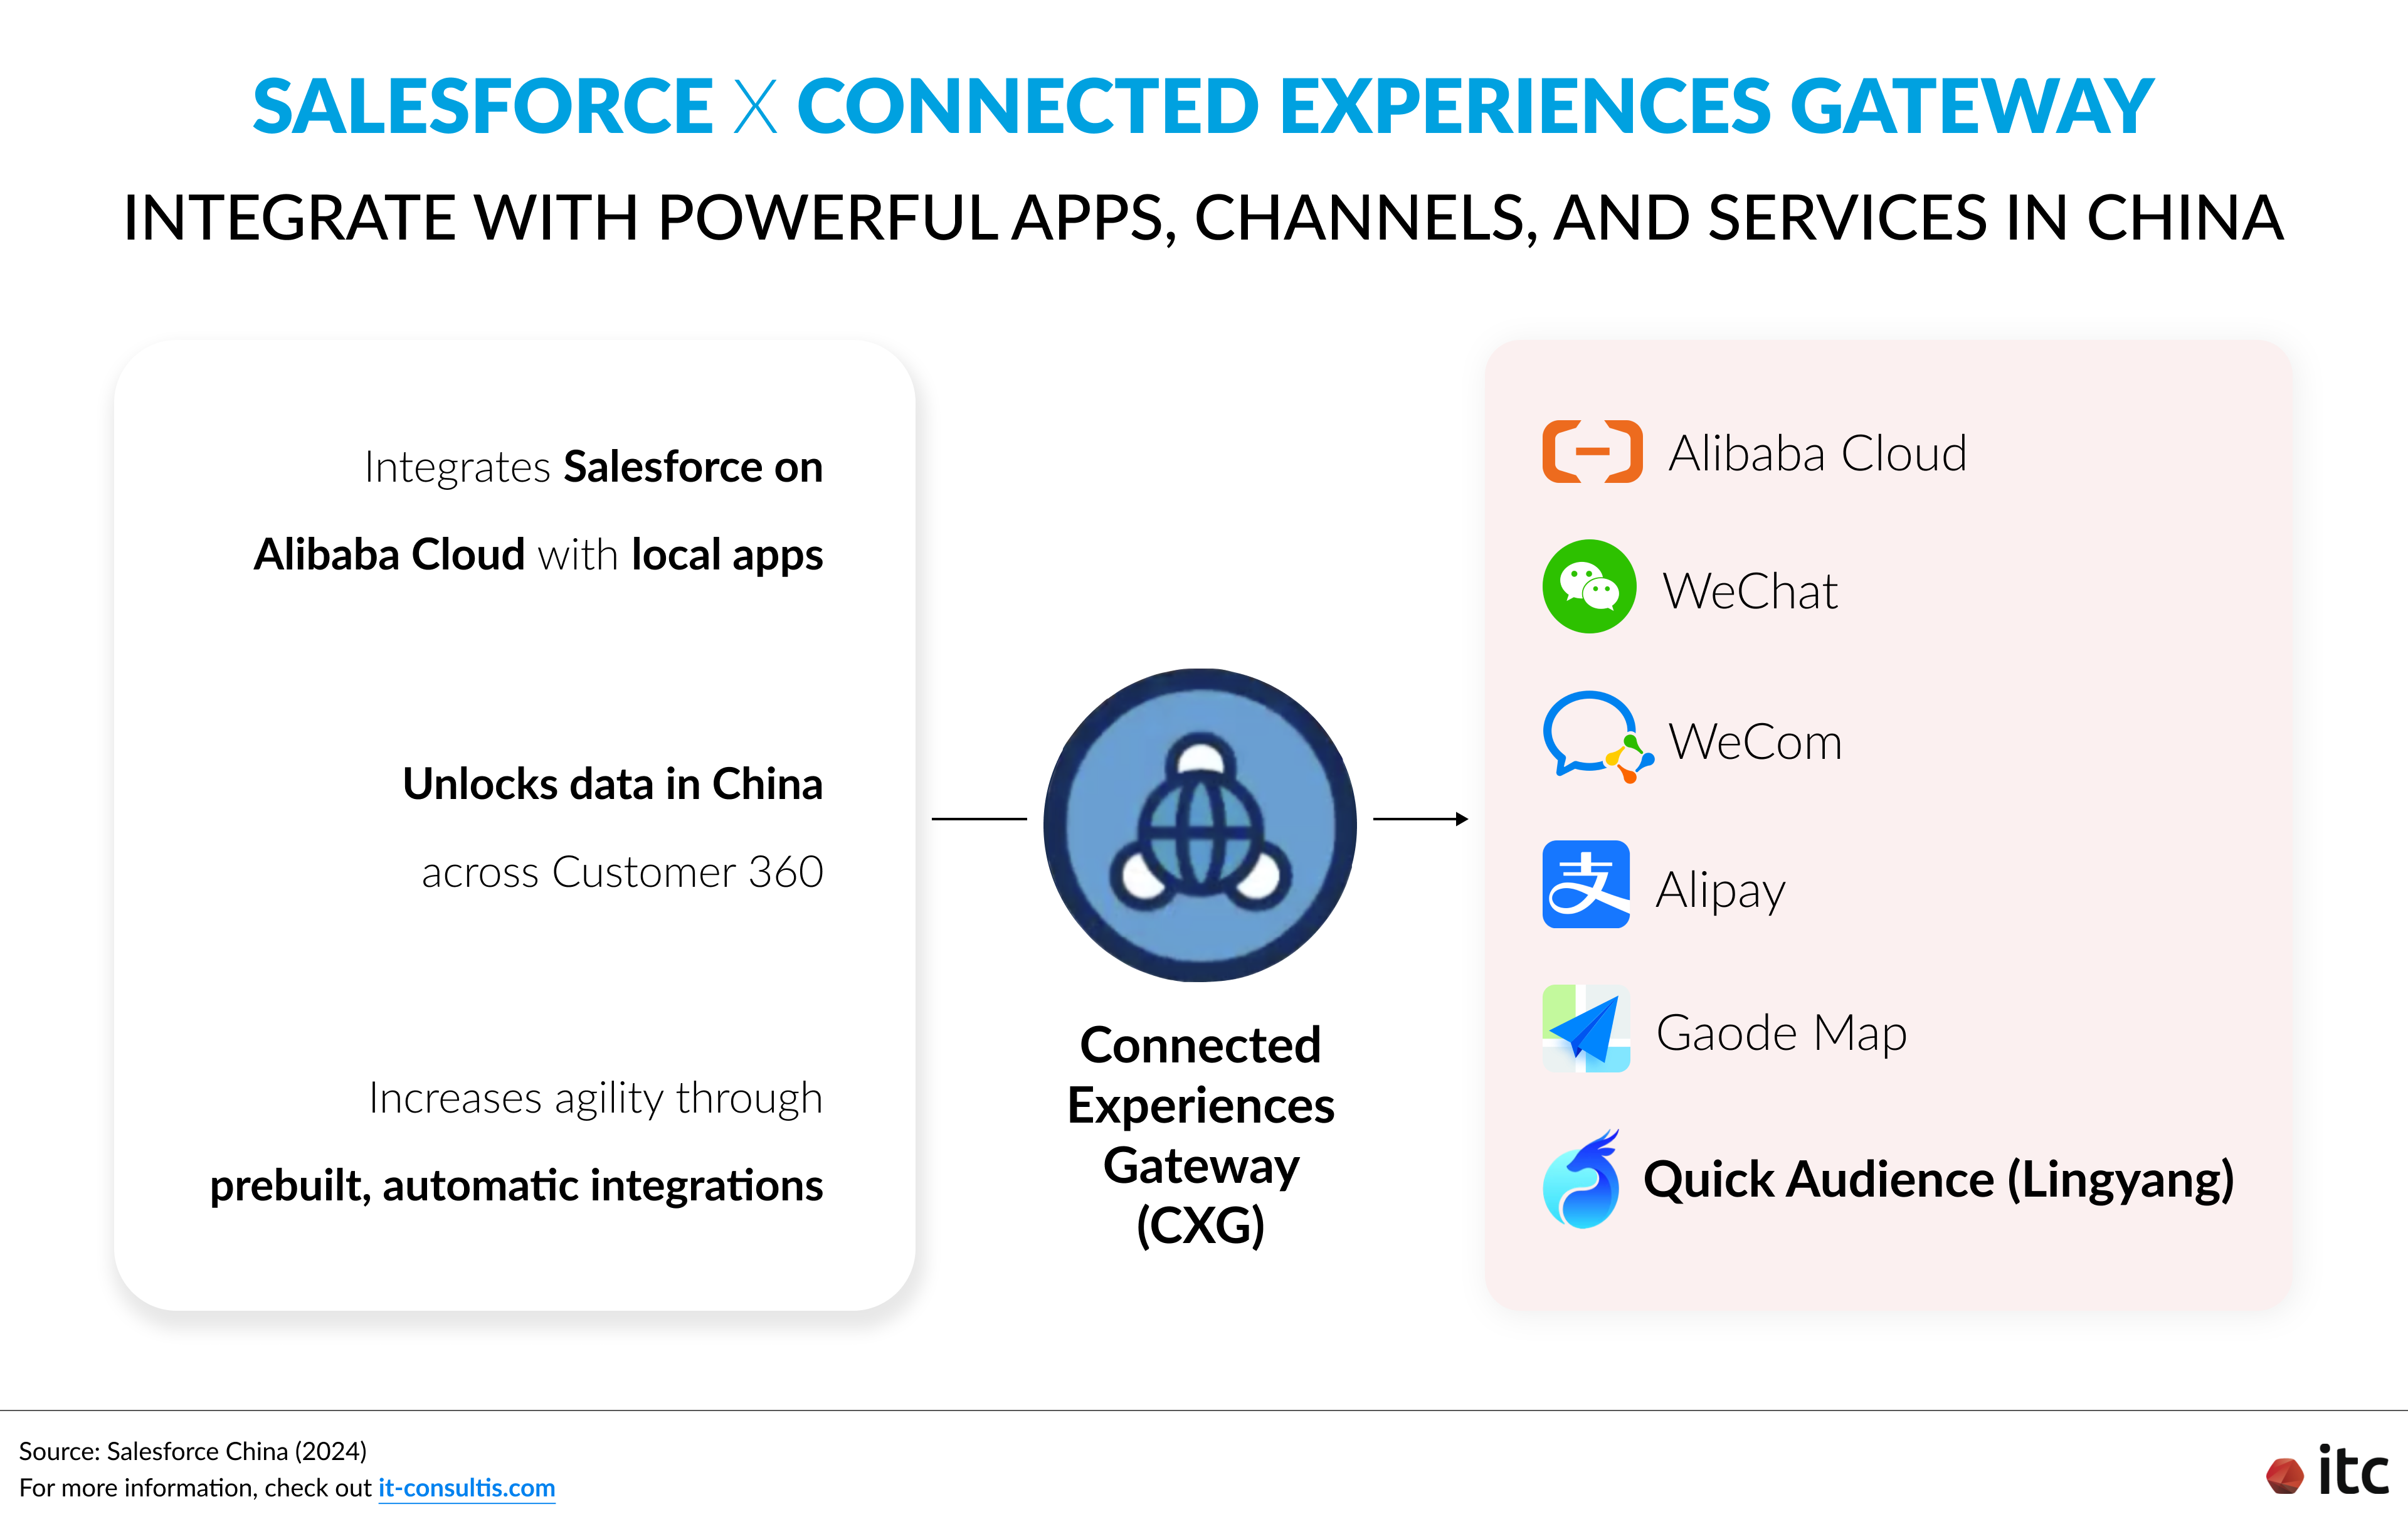 How Salesforce Connected Experiences Gateway (CXG) enables seamless connections with local touchpoints.